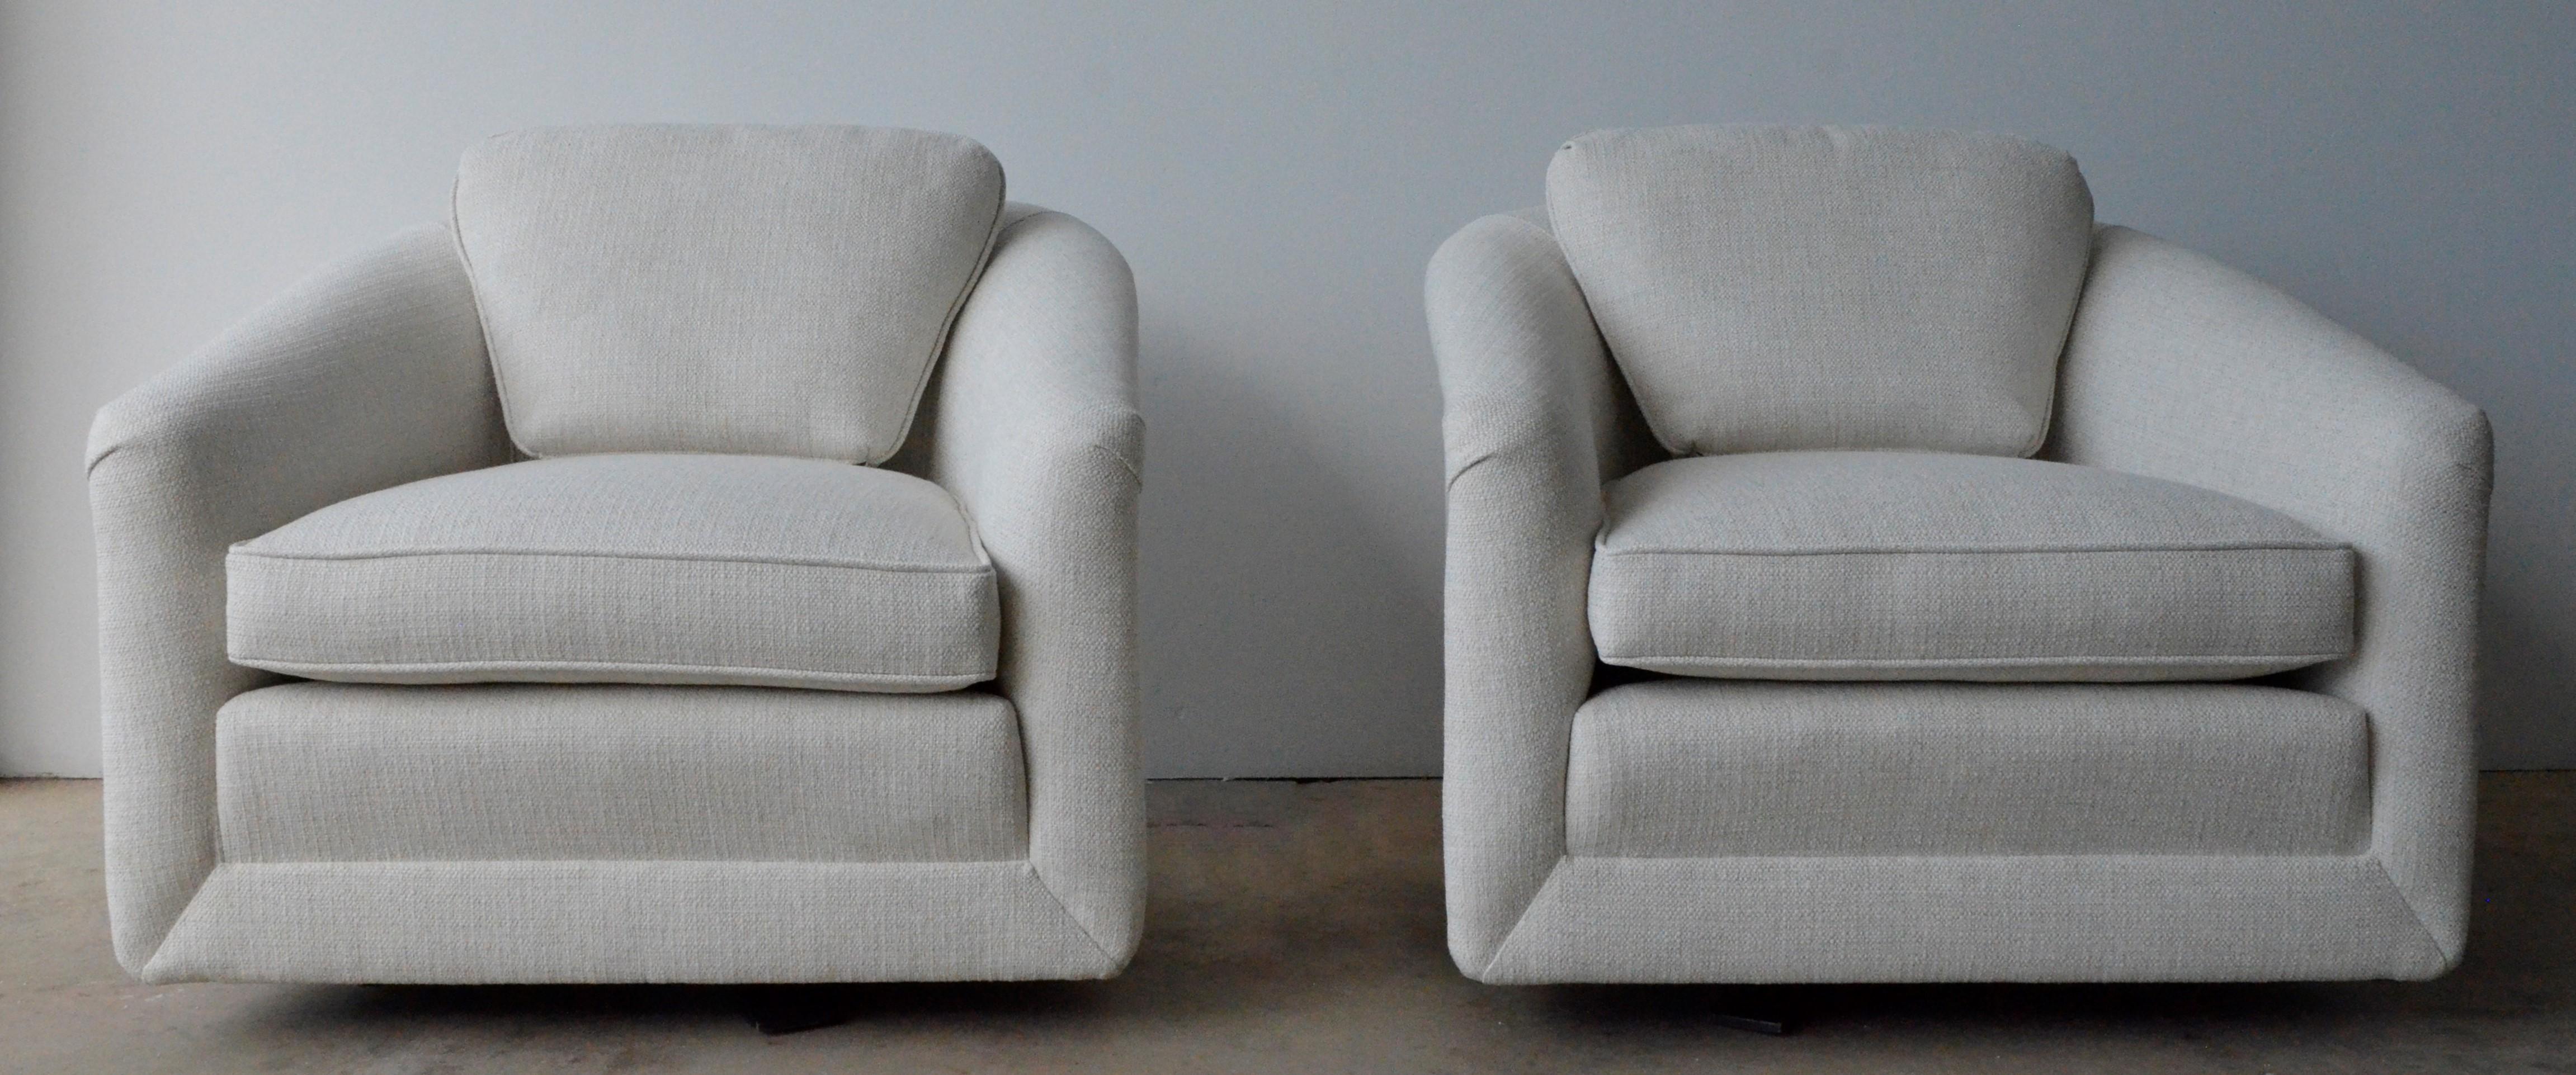 Pair of Milo Baughman Style New White Upholstery Swivel Chairs with Back Cushion In Good Condition For Sale In Houston, TX